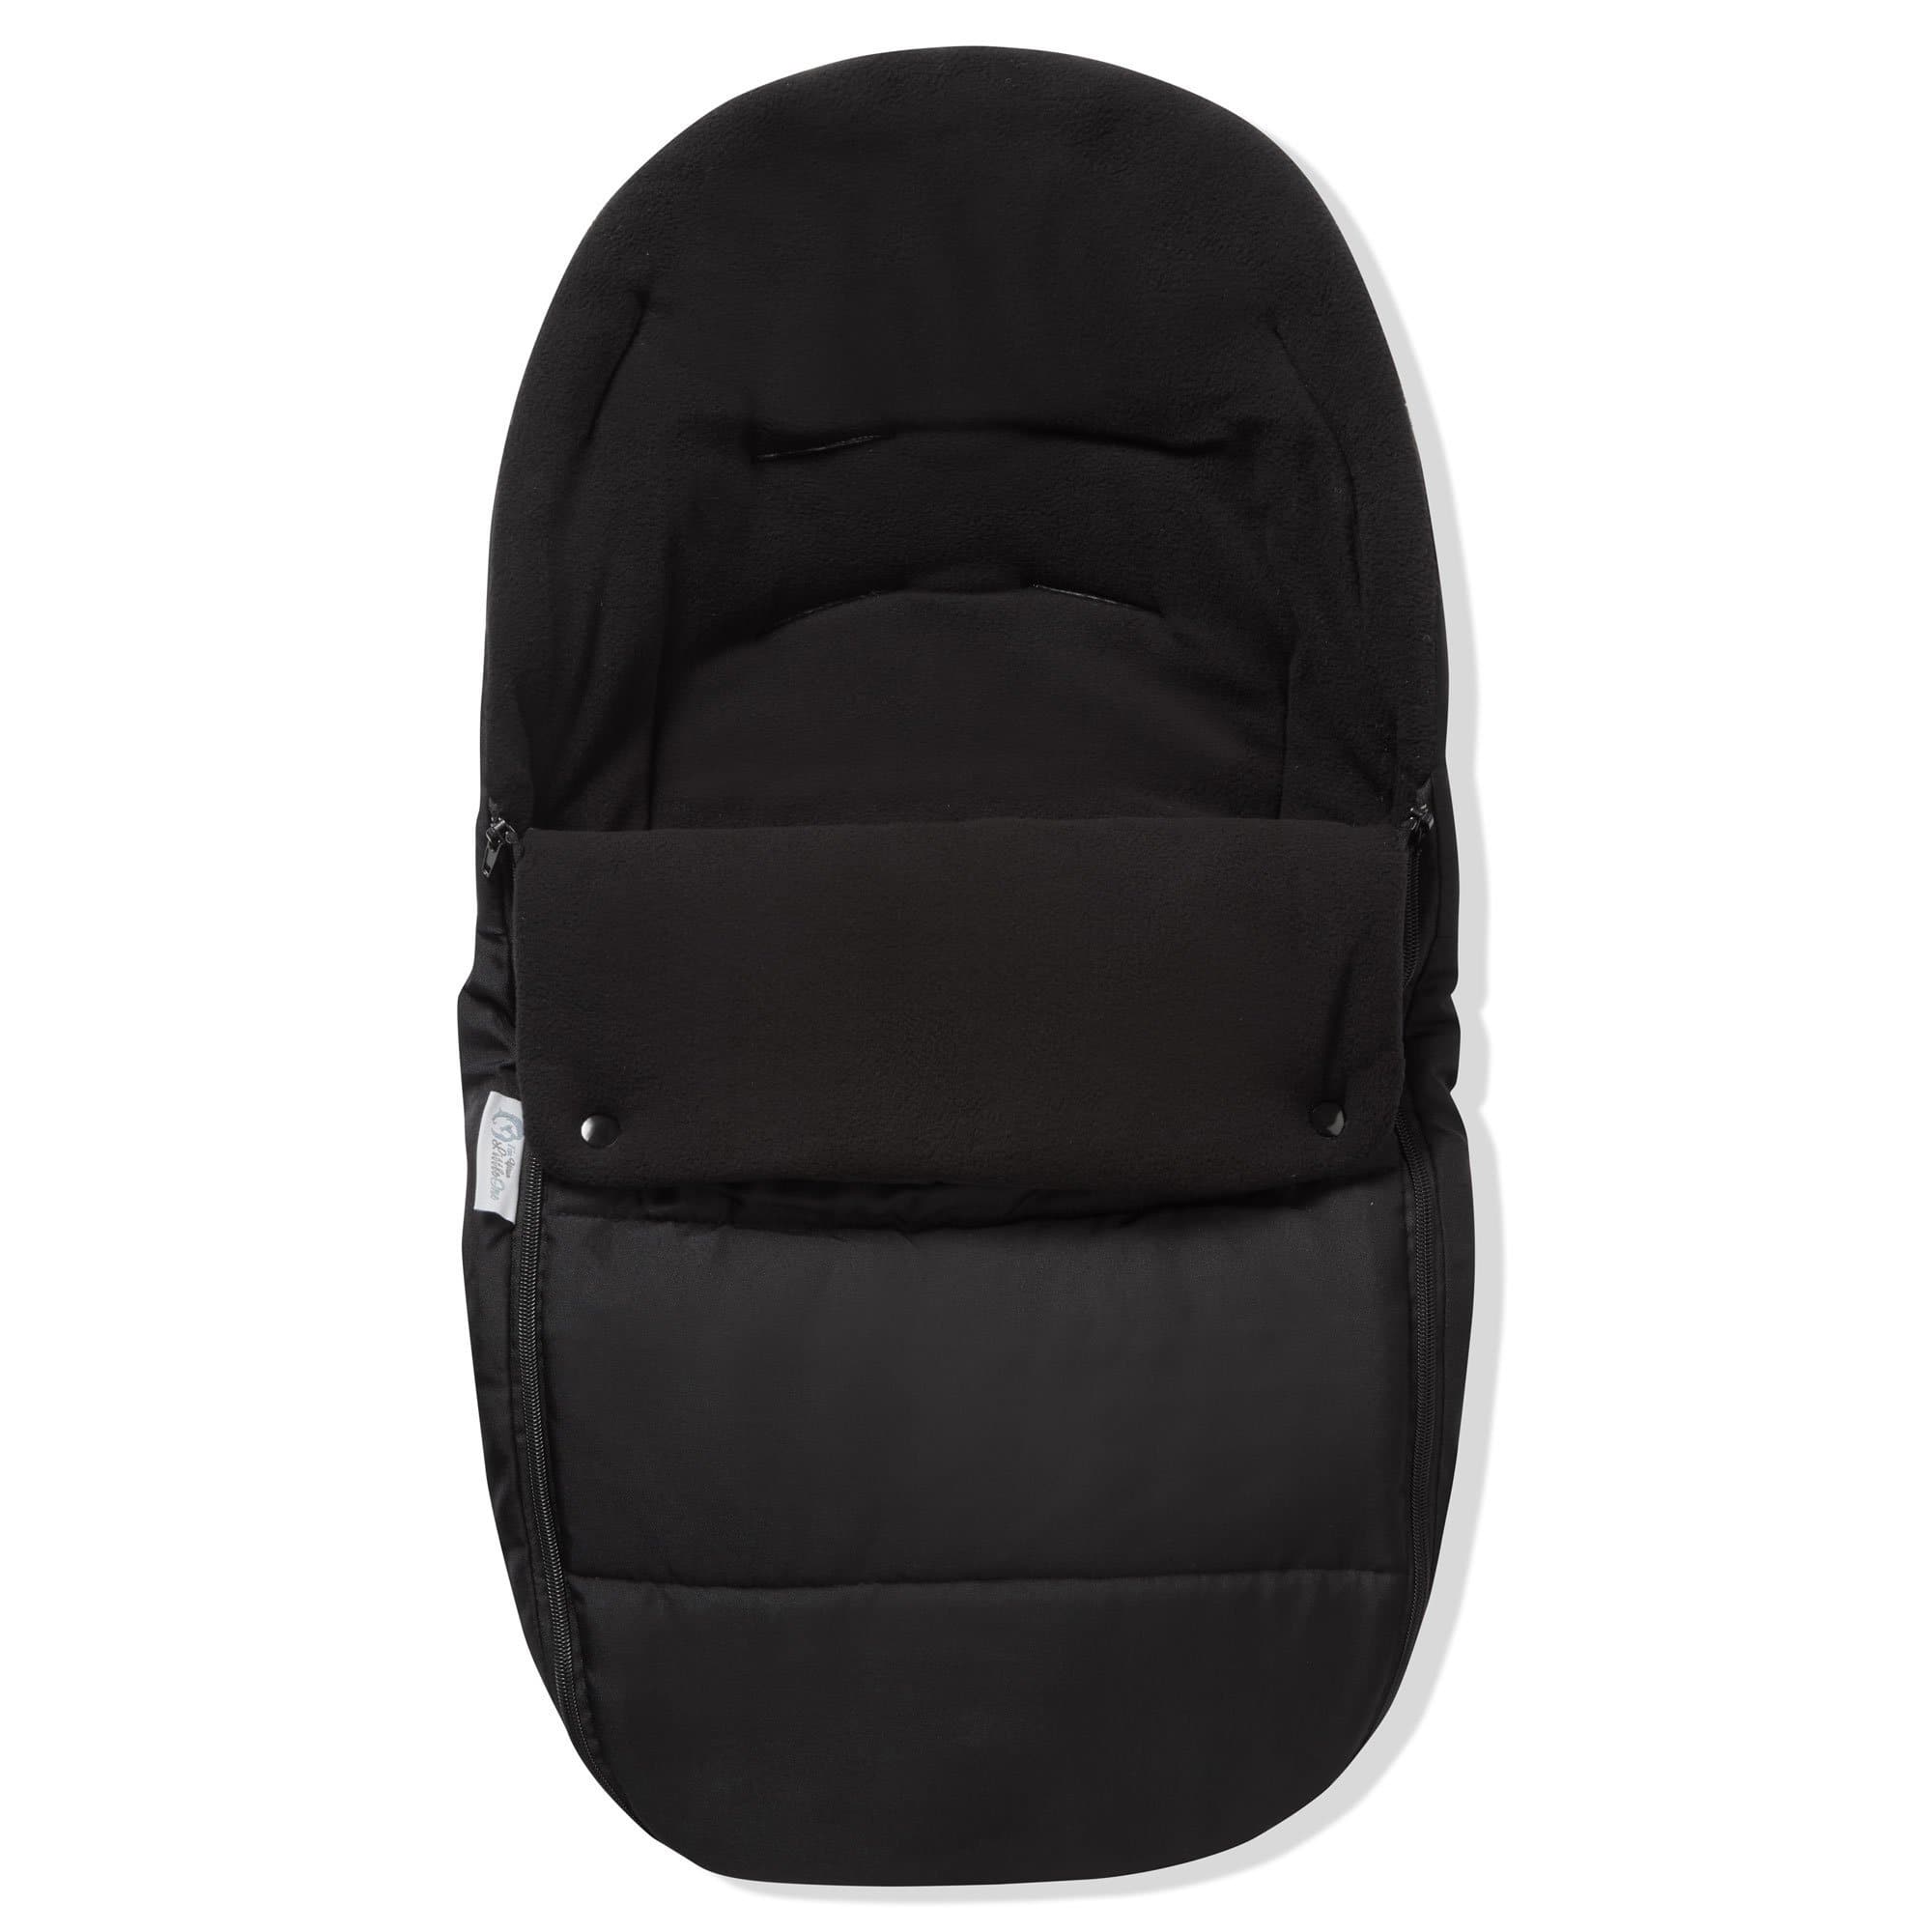 Premium Car Seat Footmuff / Cosy Toes Compatible With Jane - Black Jack / Fits All Models | For Your Little One